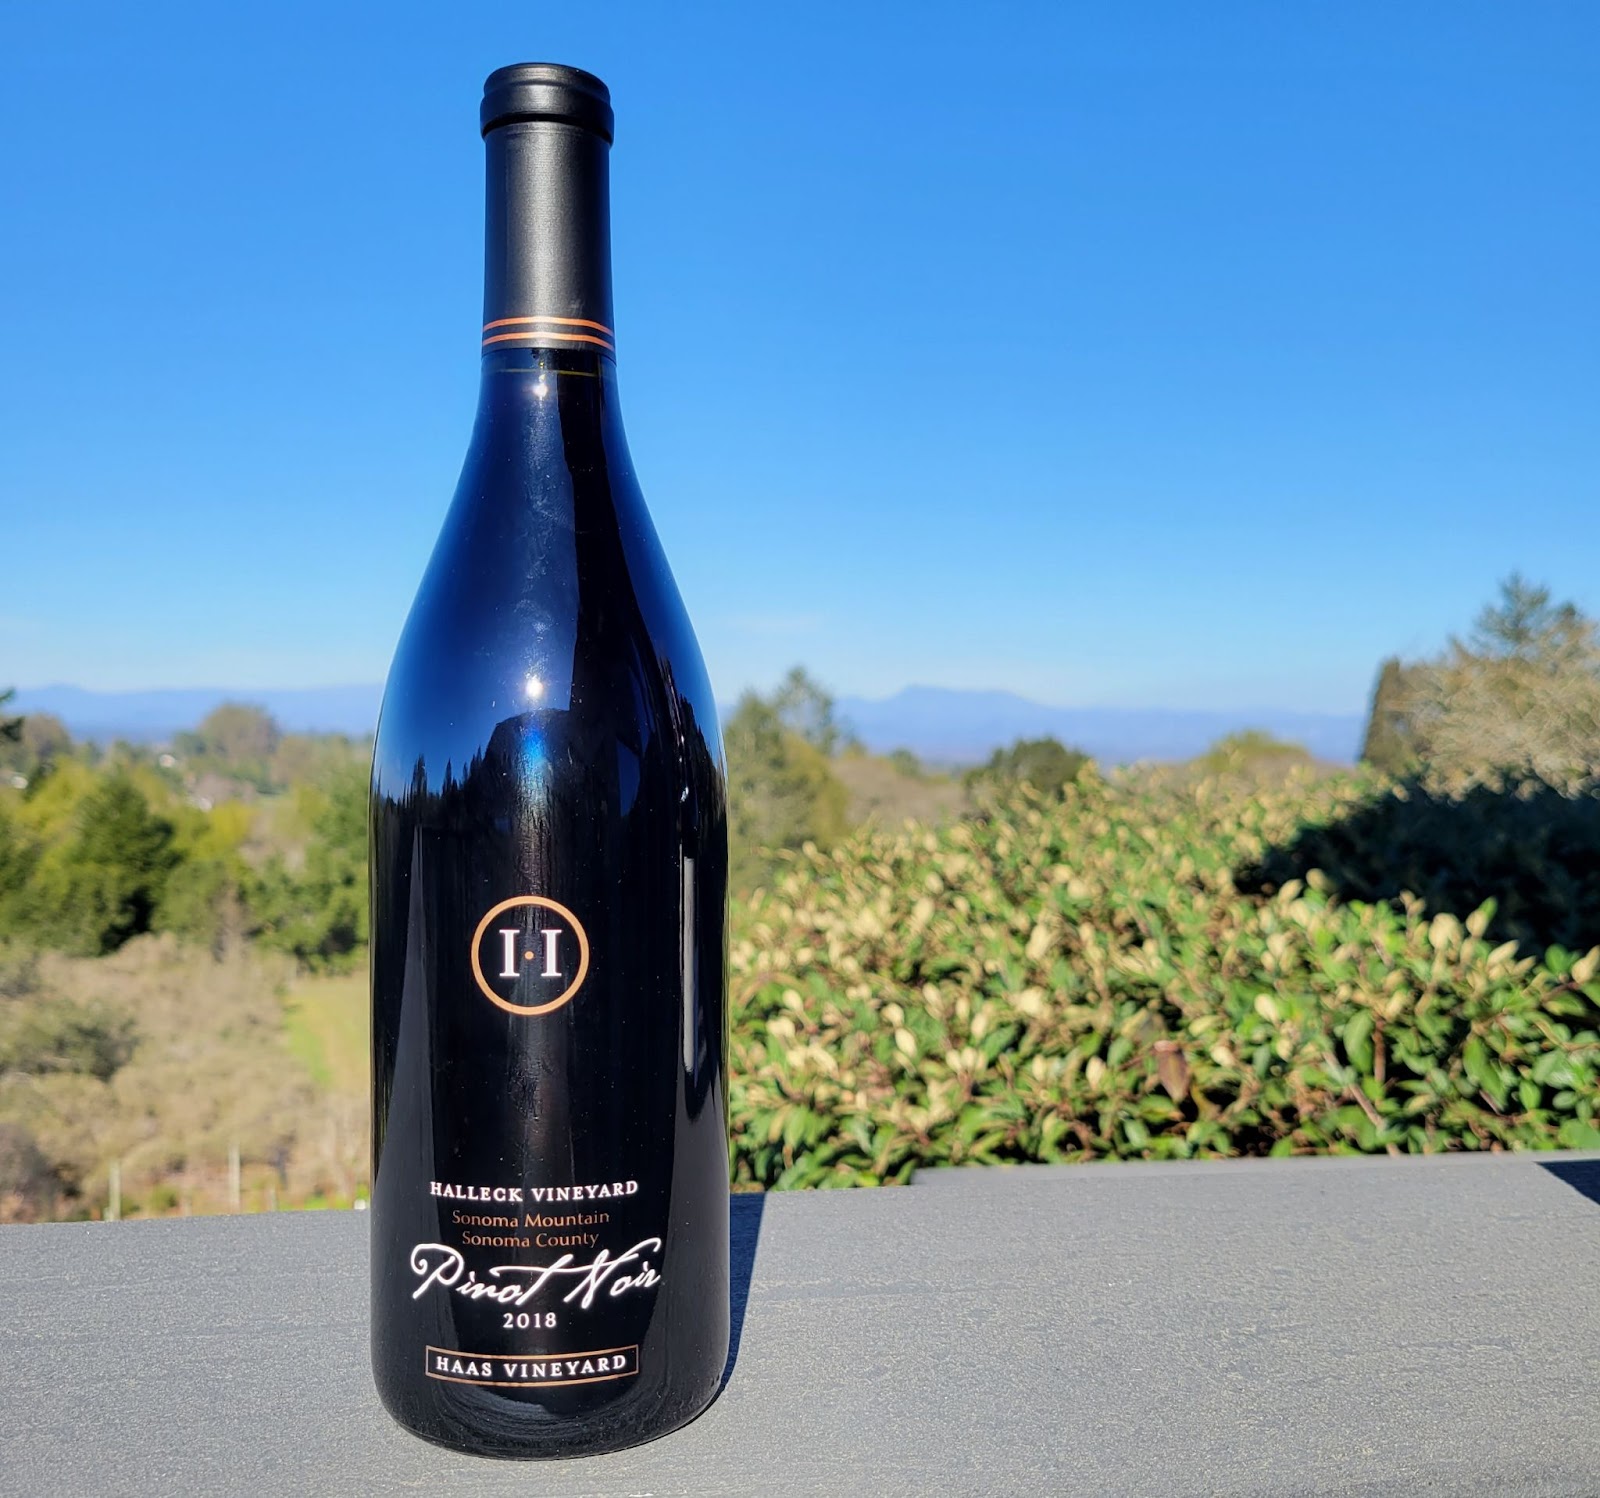 Halleck 2018 Haas Vineyard Pinot Noir is notable for its beautiful, gem-like color and slightly spicy, herbaceous flavor.